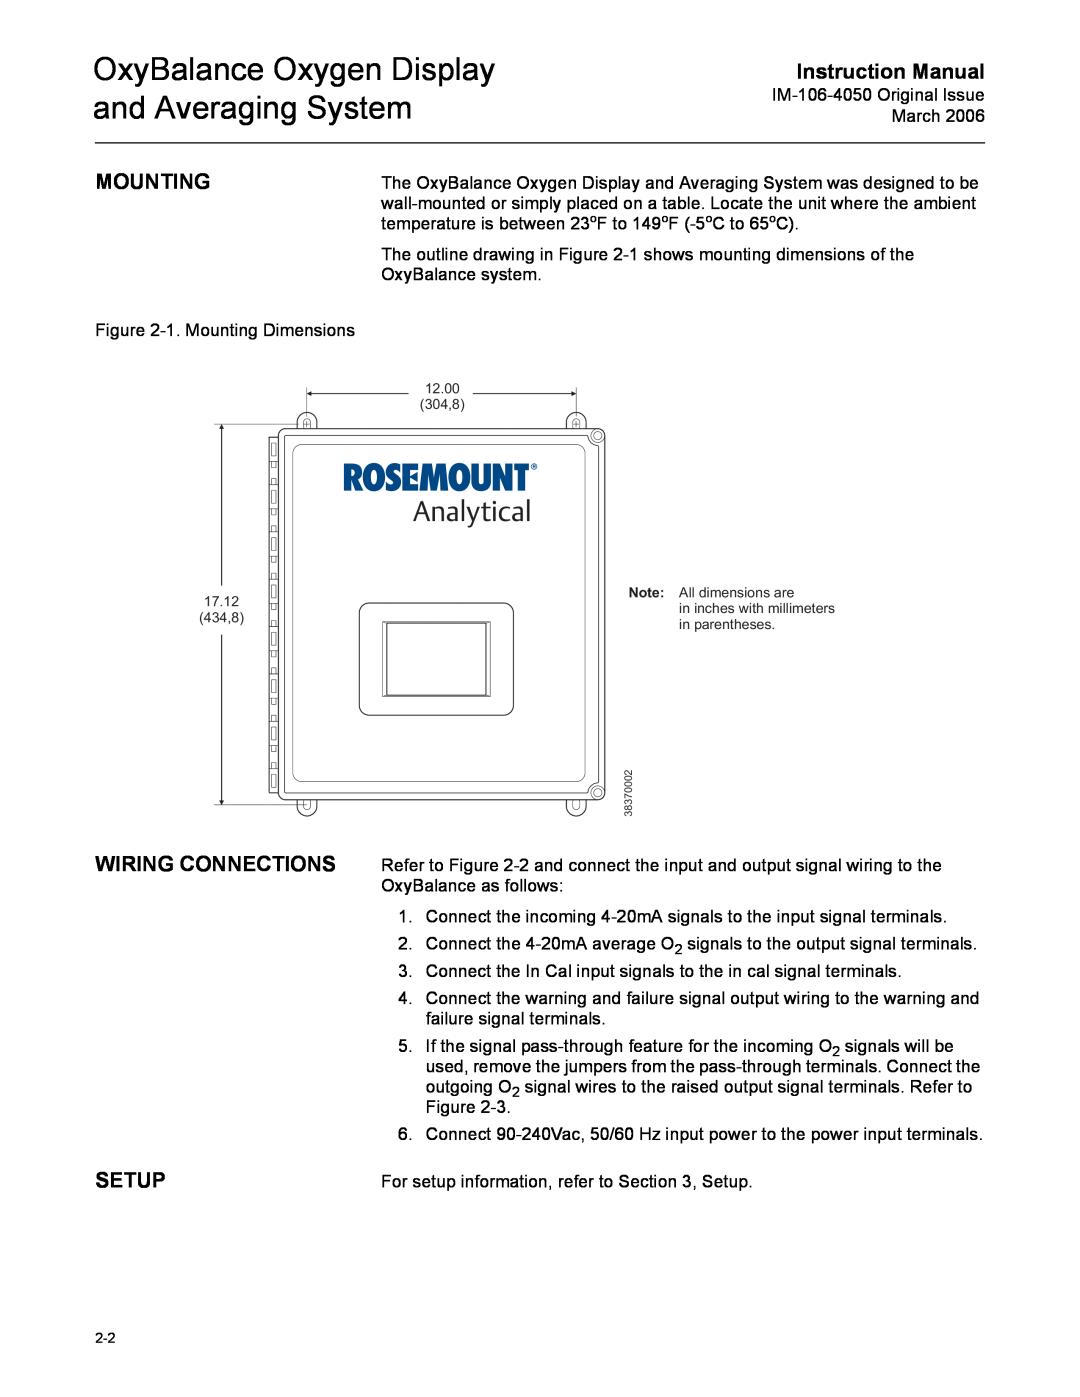 Emerson IM-106-4050 Mounting, Wiring Connections Setup, OxyBalance Oxygen Display and Averaging System, Instruction Manual 